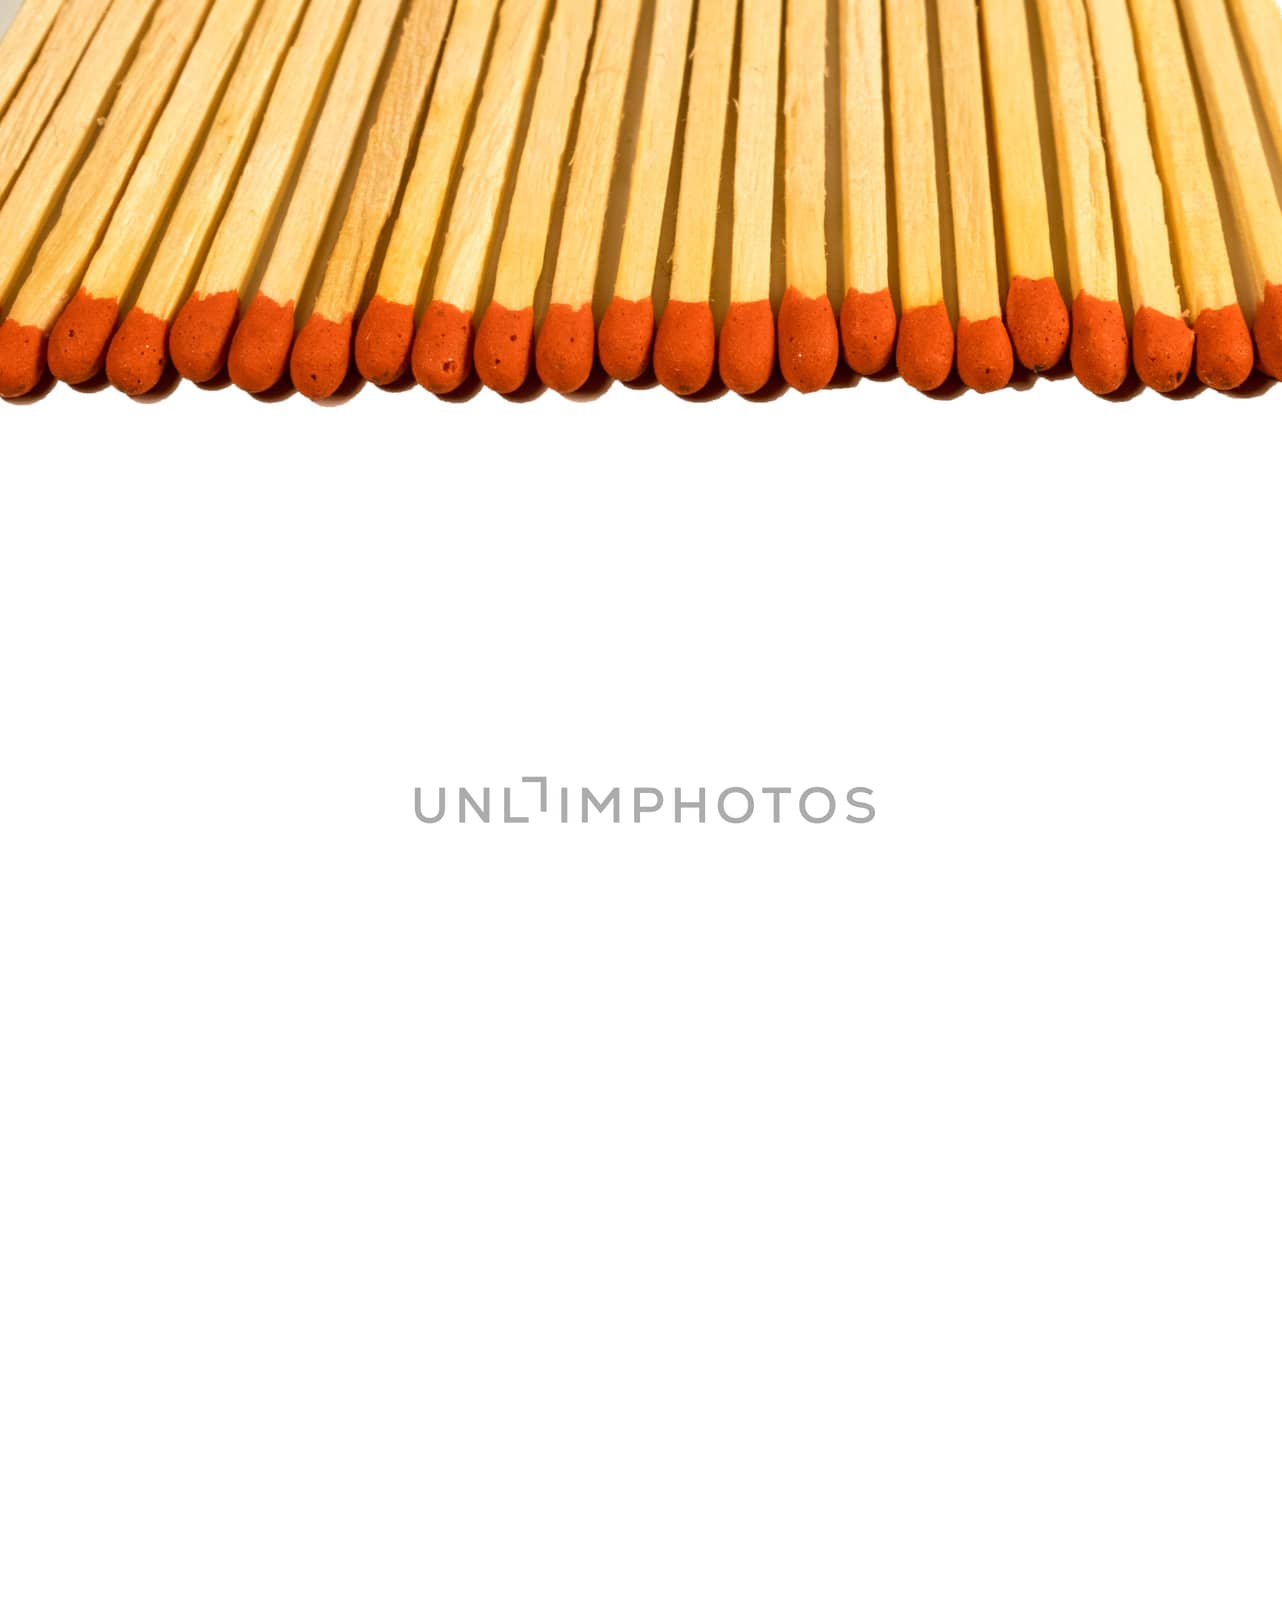 Some matches on the superior border of the image